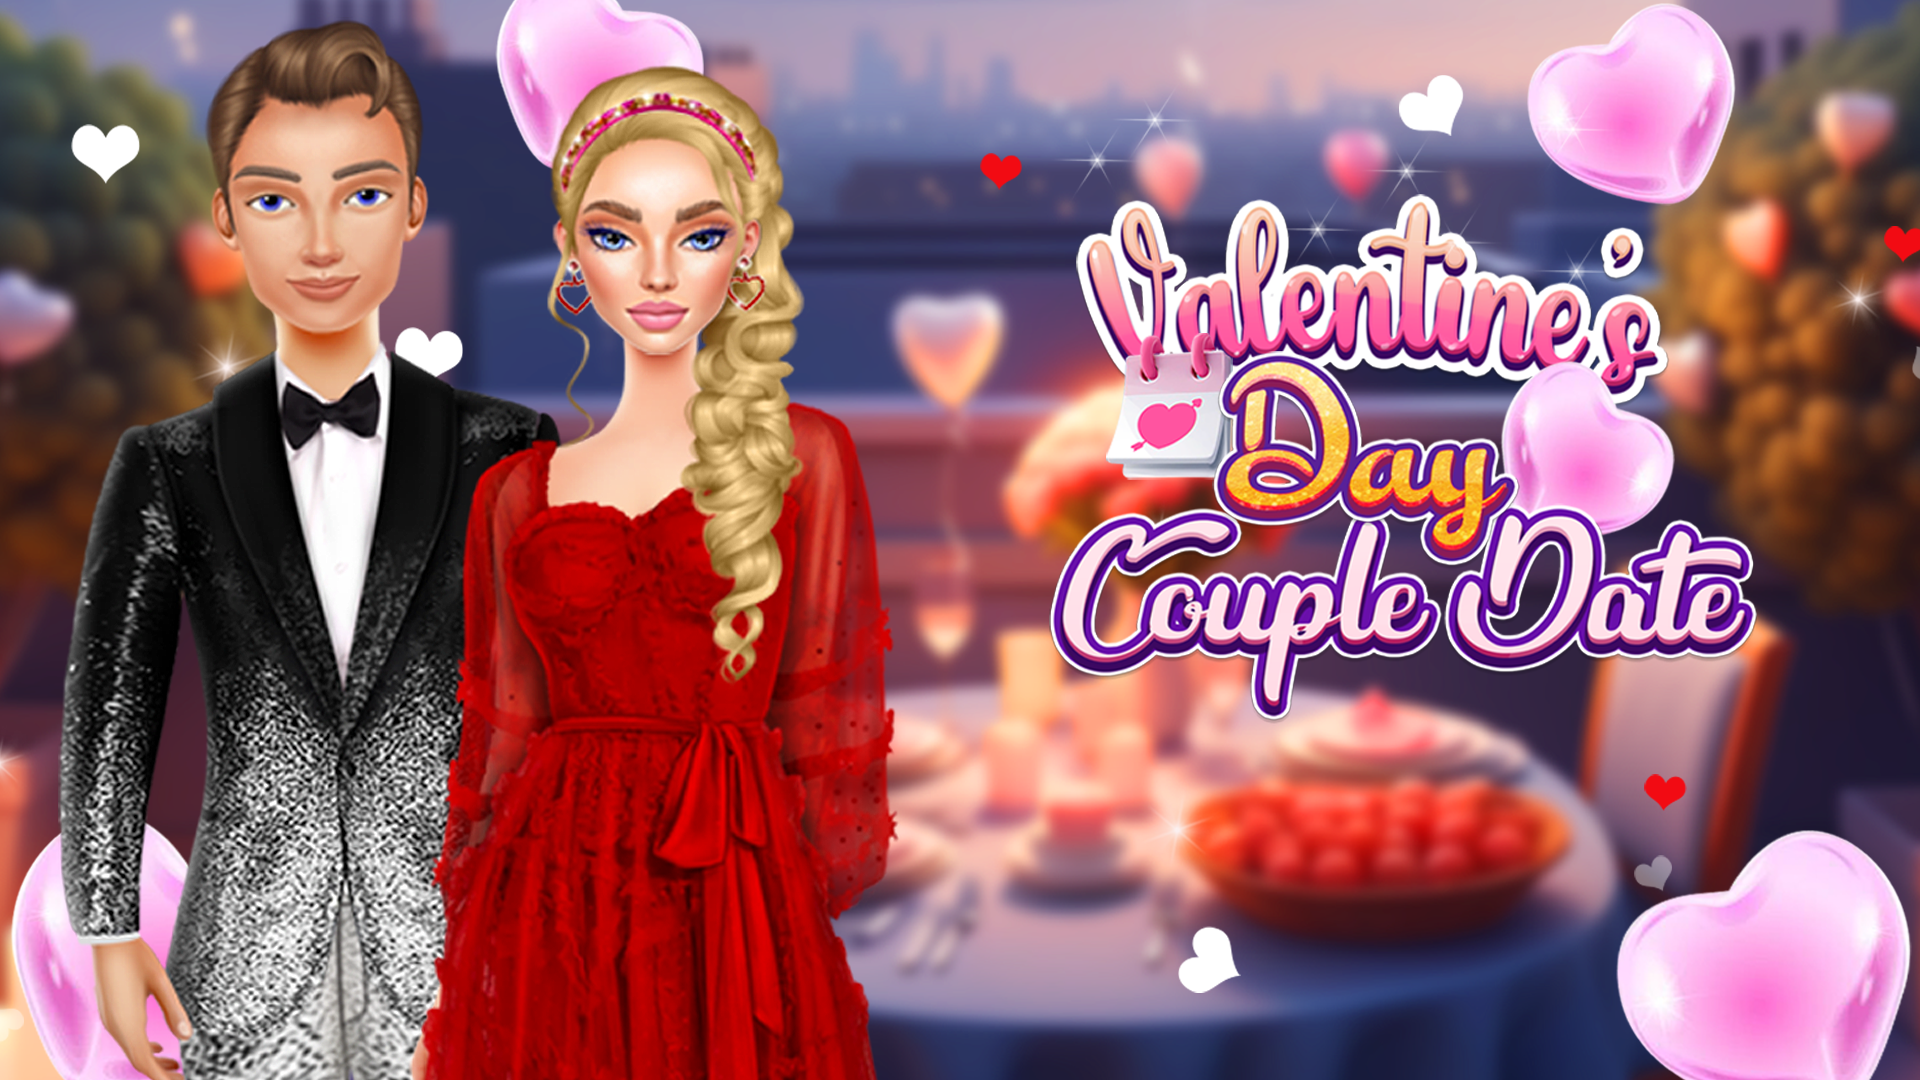 Valentines Day Couple Date Game Image